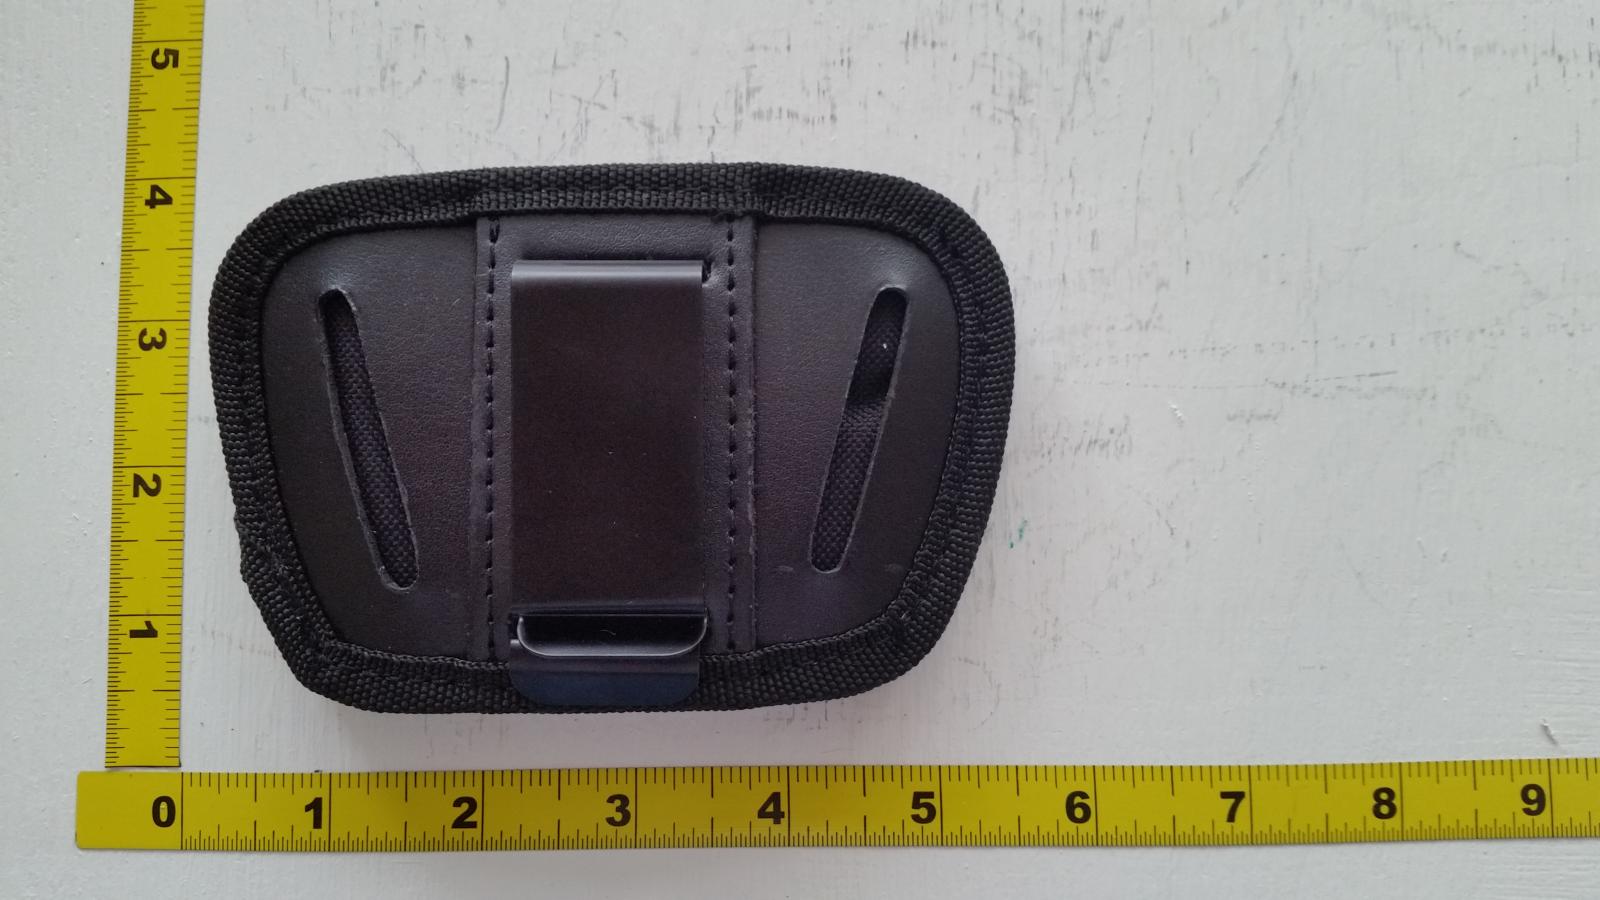 5" Black Leather Holster. Clip on belt or remove clip and thread onto belt through loops.